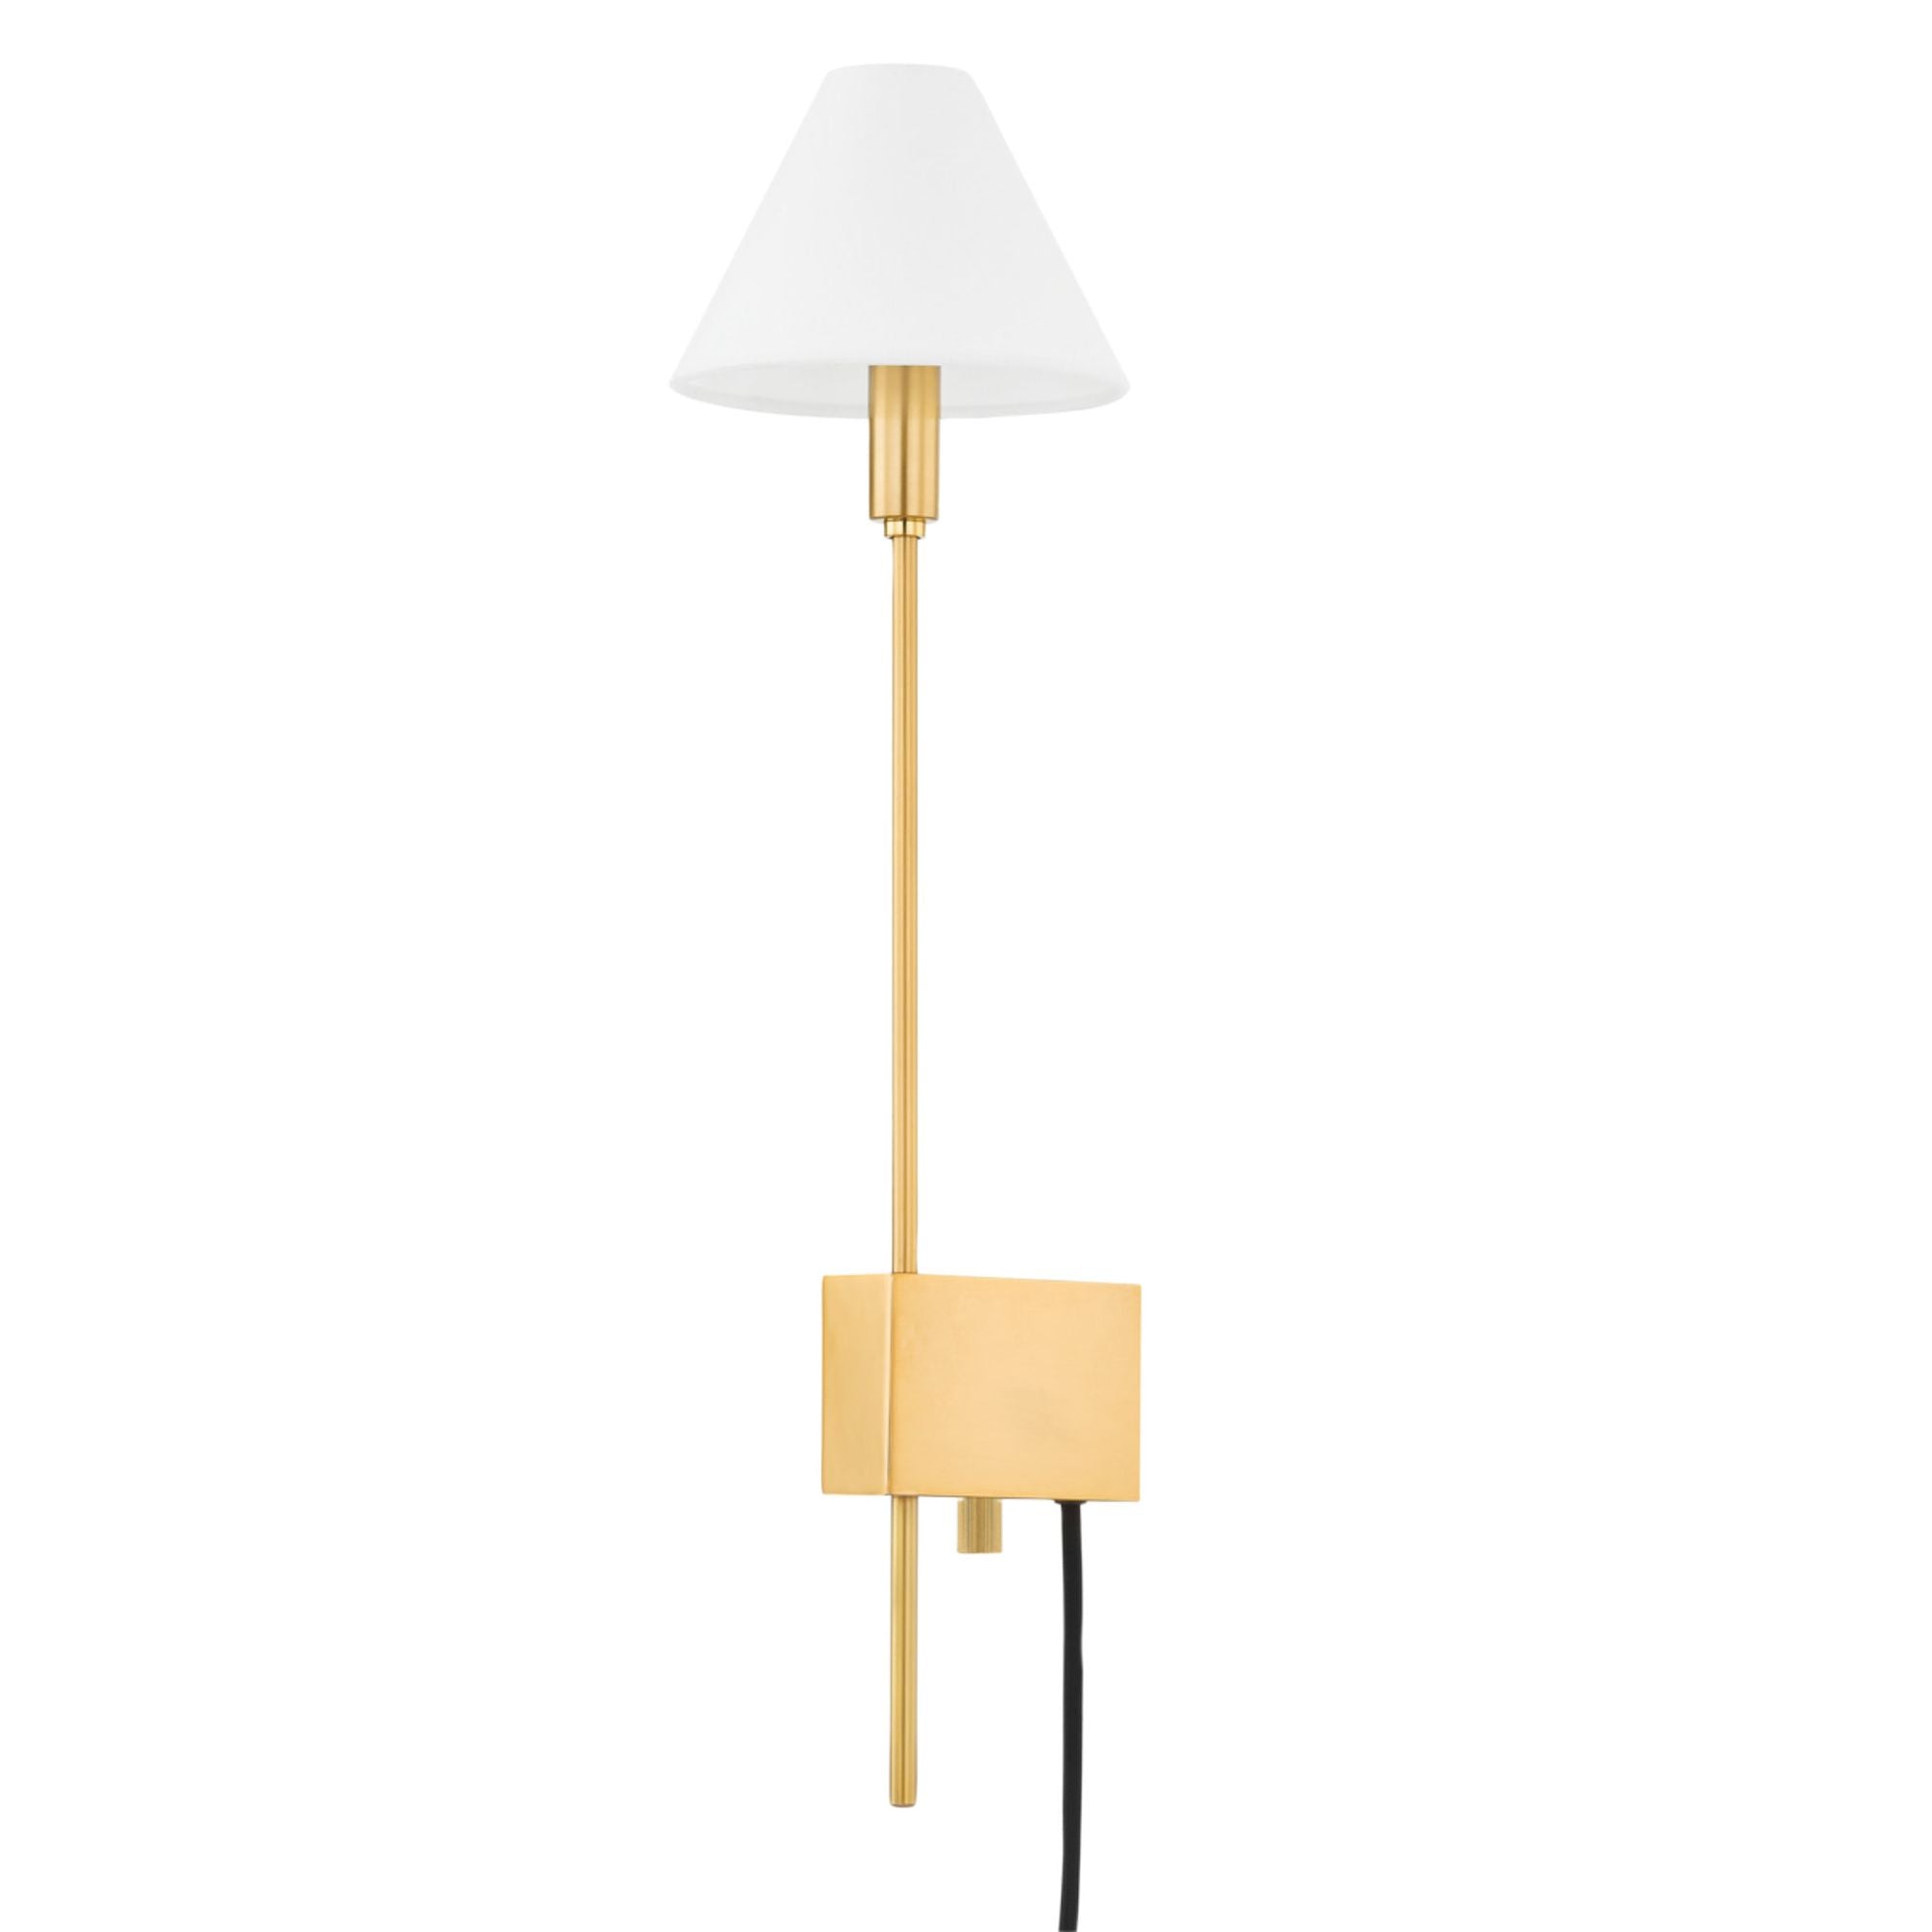 Teaneck 1 Light Plug-in Sconce in Aged Brass